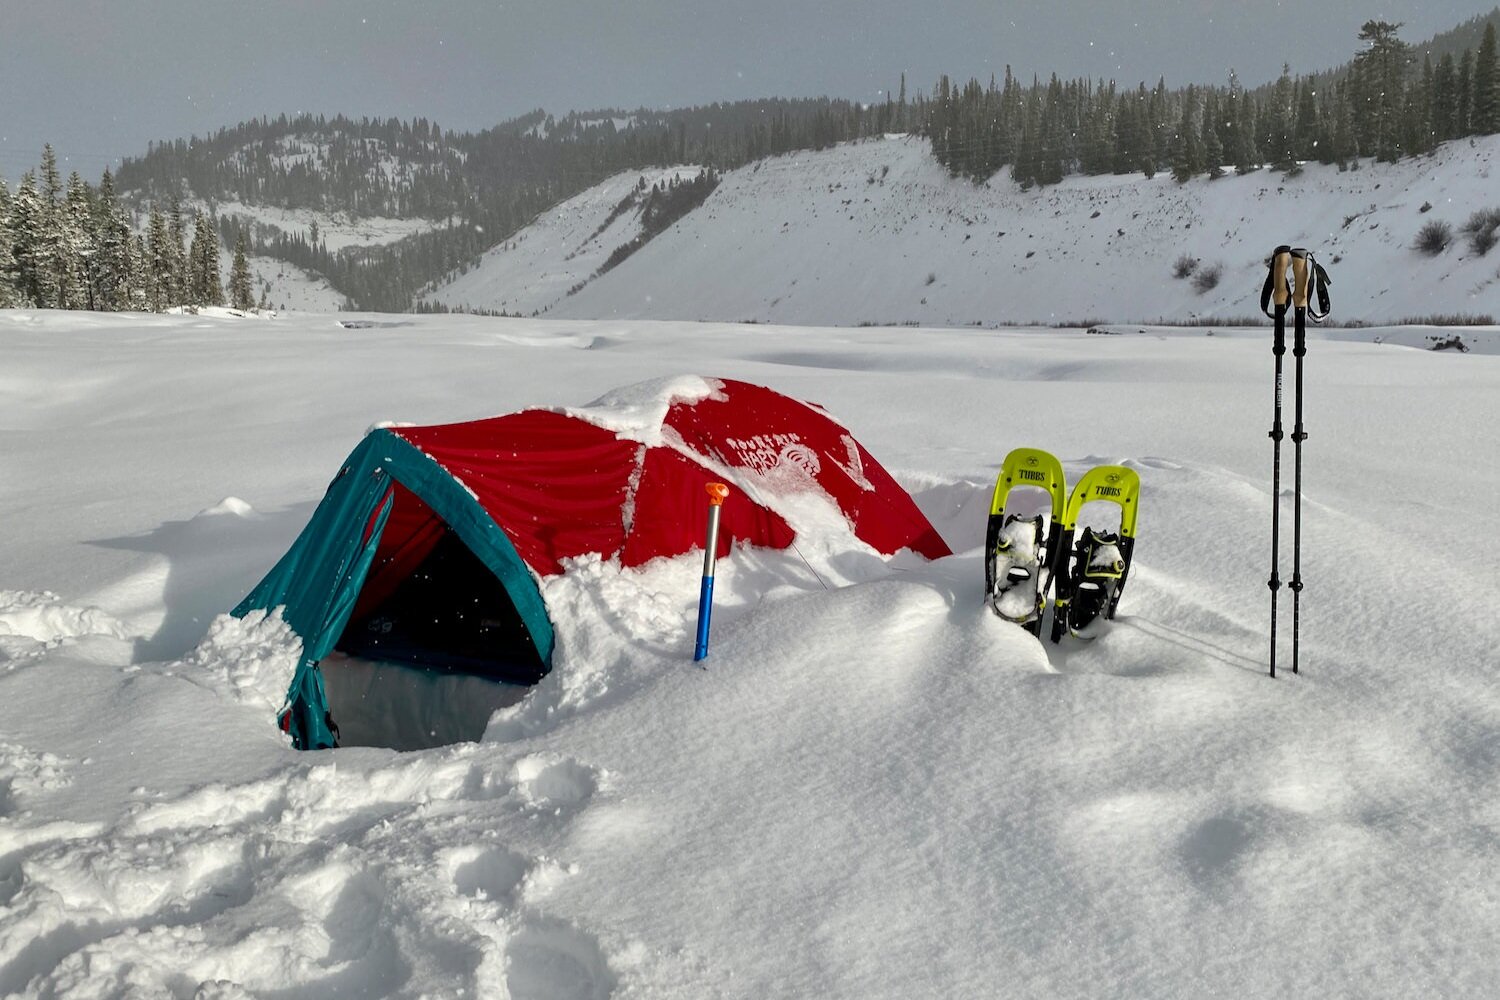 A 4-season tent, like the Mountain Hardwear Trango 2, has stronger poles, more durable fabric, & a dome-shaped design for solid protection in harsh conditions.